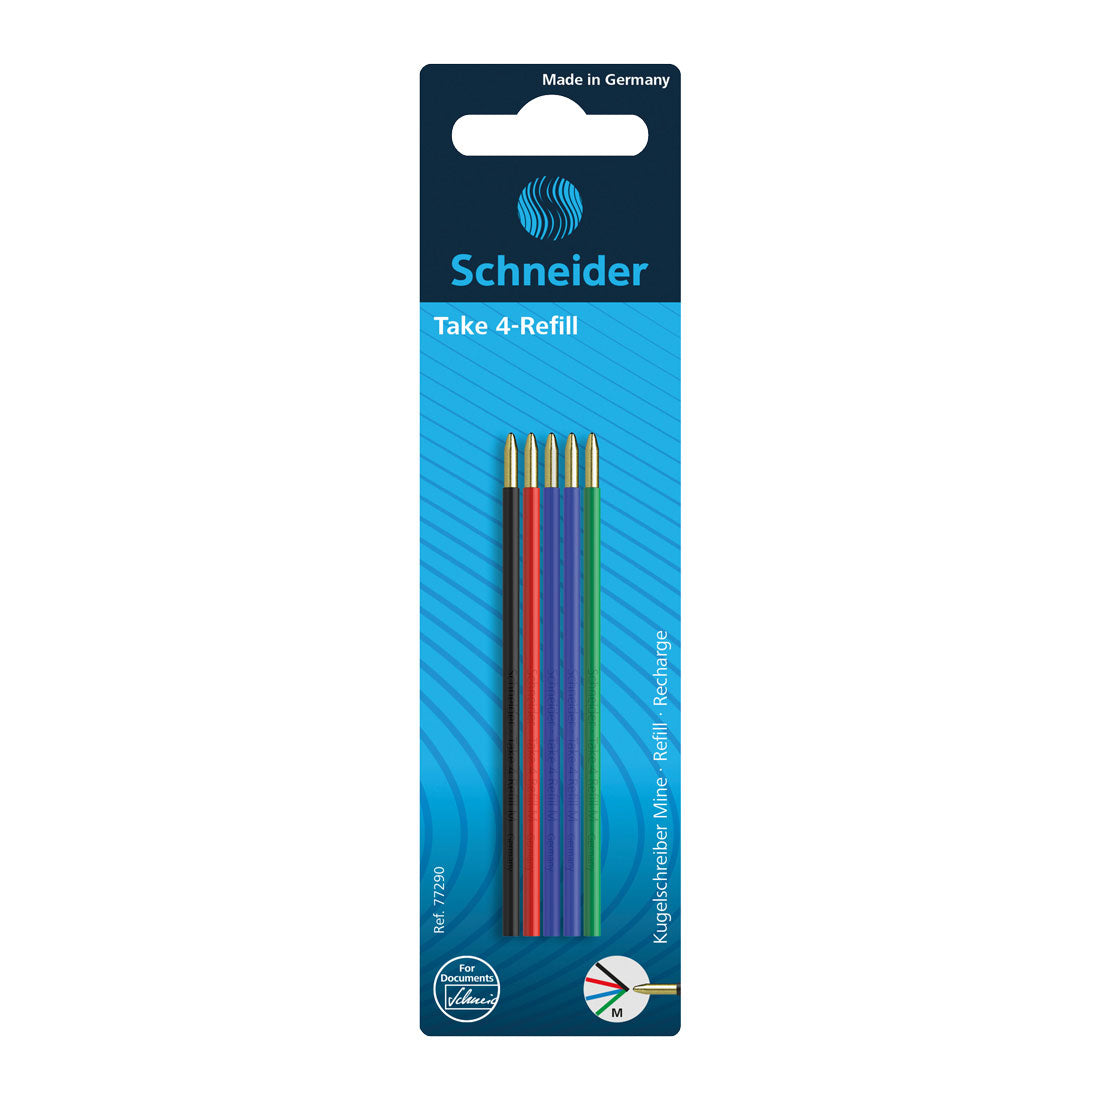 Take 4 Refill for 4-Color Ballpoint Pen M - Assorted (5) Media 1 of 3Take 4 Refill for 4-Color Ballpoint Pen M - Assorted (5)